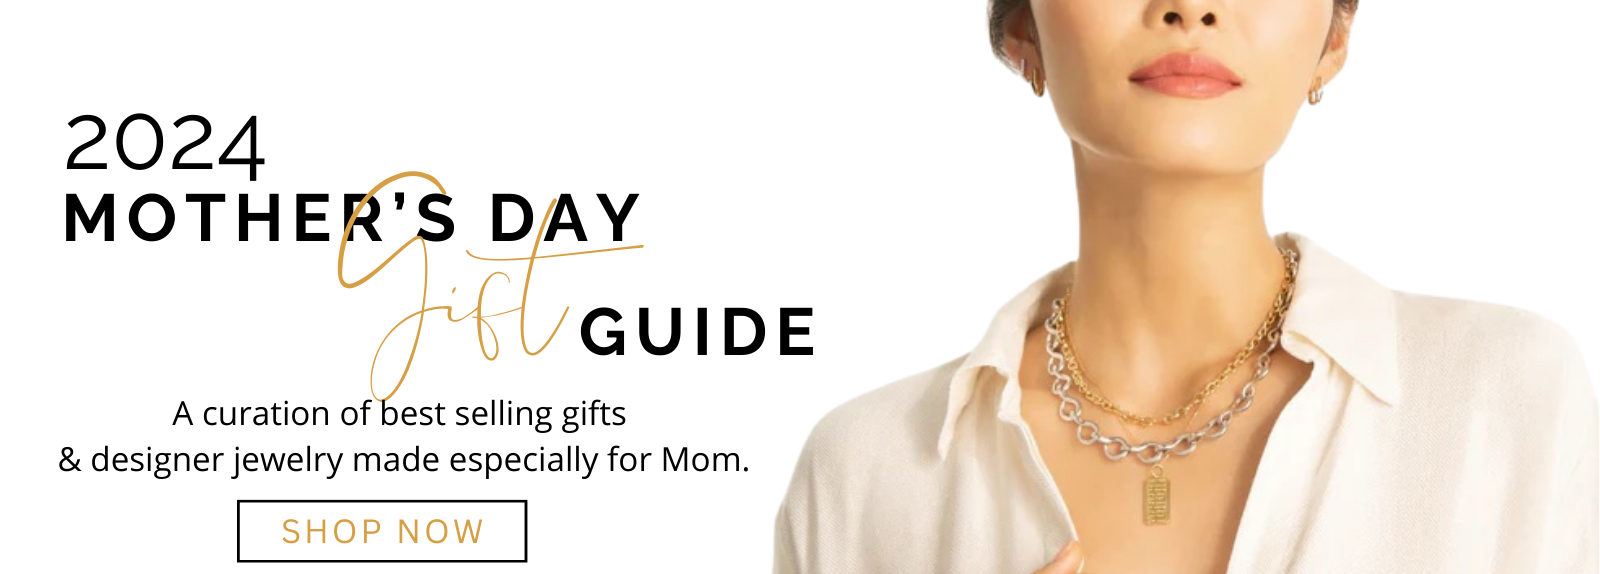 mother's day gift guide 2024